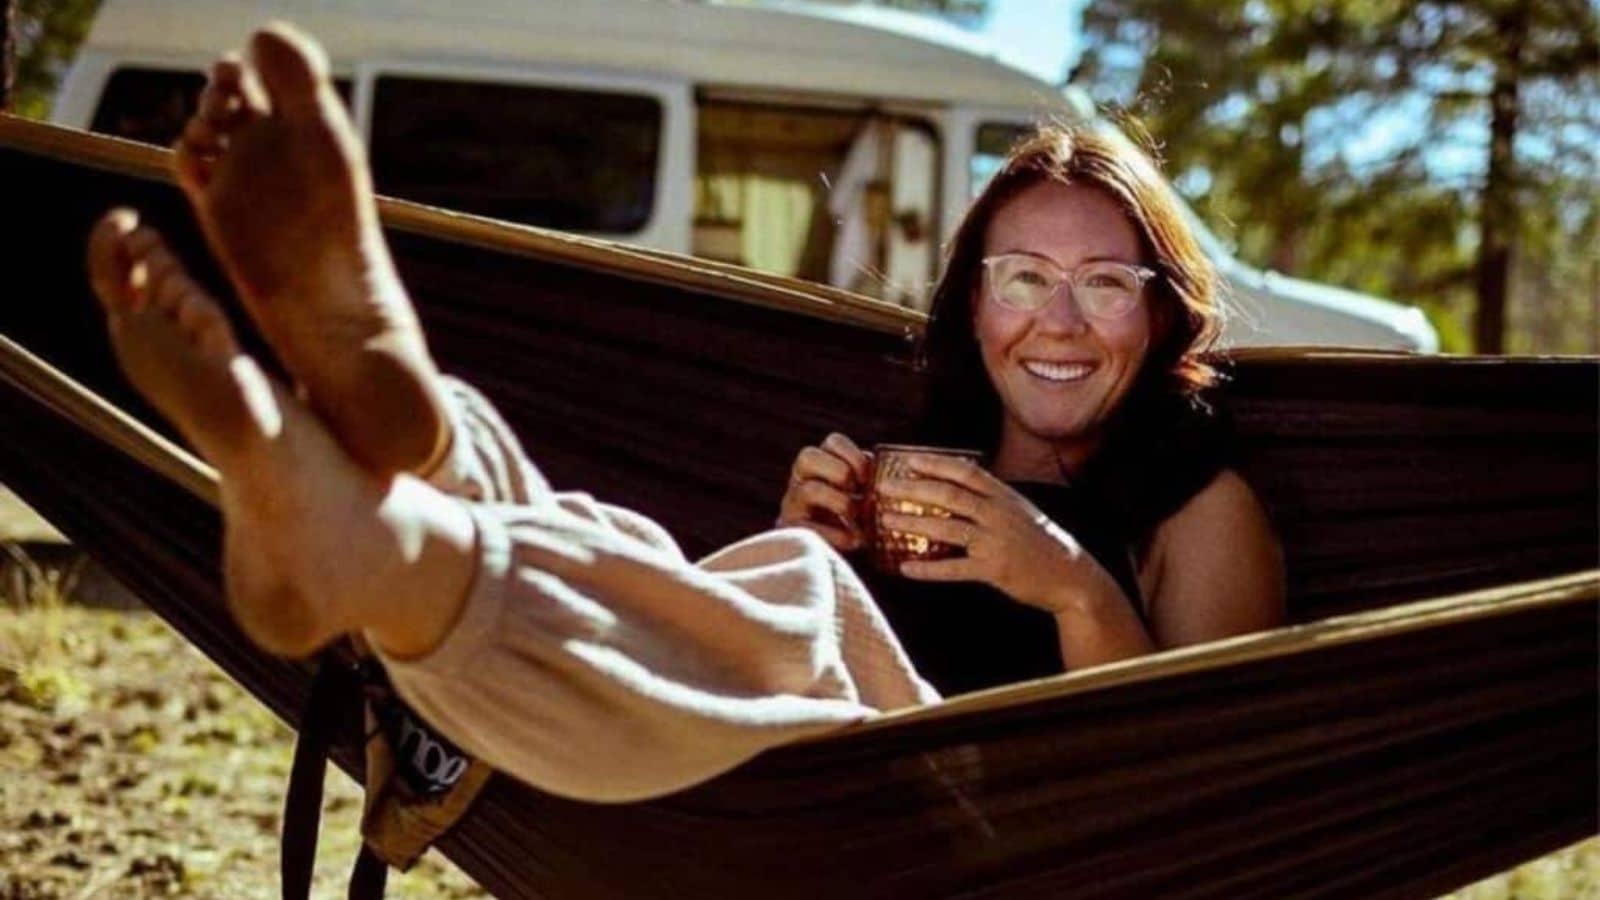 <p>Glamping is pretty much like camping, except it provides extra facilities to make the experience more upscale. It’s perfect for people who love camping but don’t want to give up the luxury of a shower, comfortable bed, and kitchen.</p> <p>We have researched some unbelievable glamping destinations for your next outdoor adventure. It’s not easy to limit this list to 19 as so many well-equipped and beautiful choices are available.</p> <p>In this guide, we have listed top-notch glamping destinations for your reference. You can review them and pick one for your next outdoor adventure.  </p>